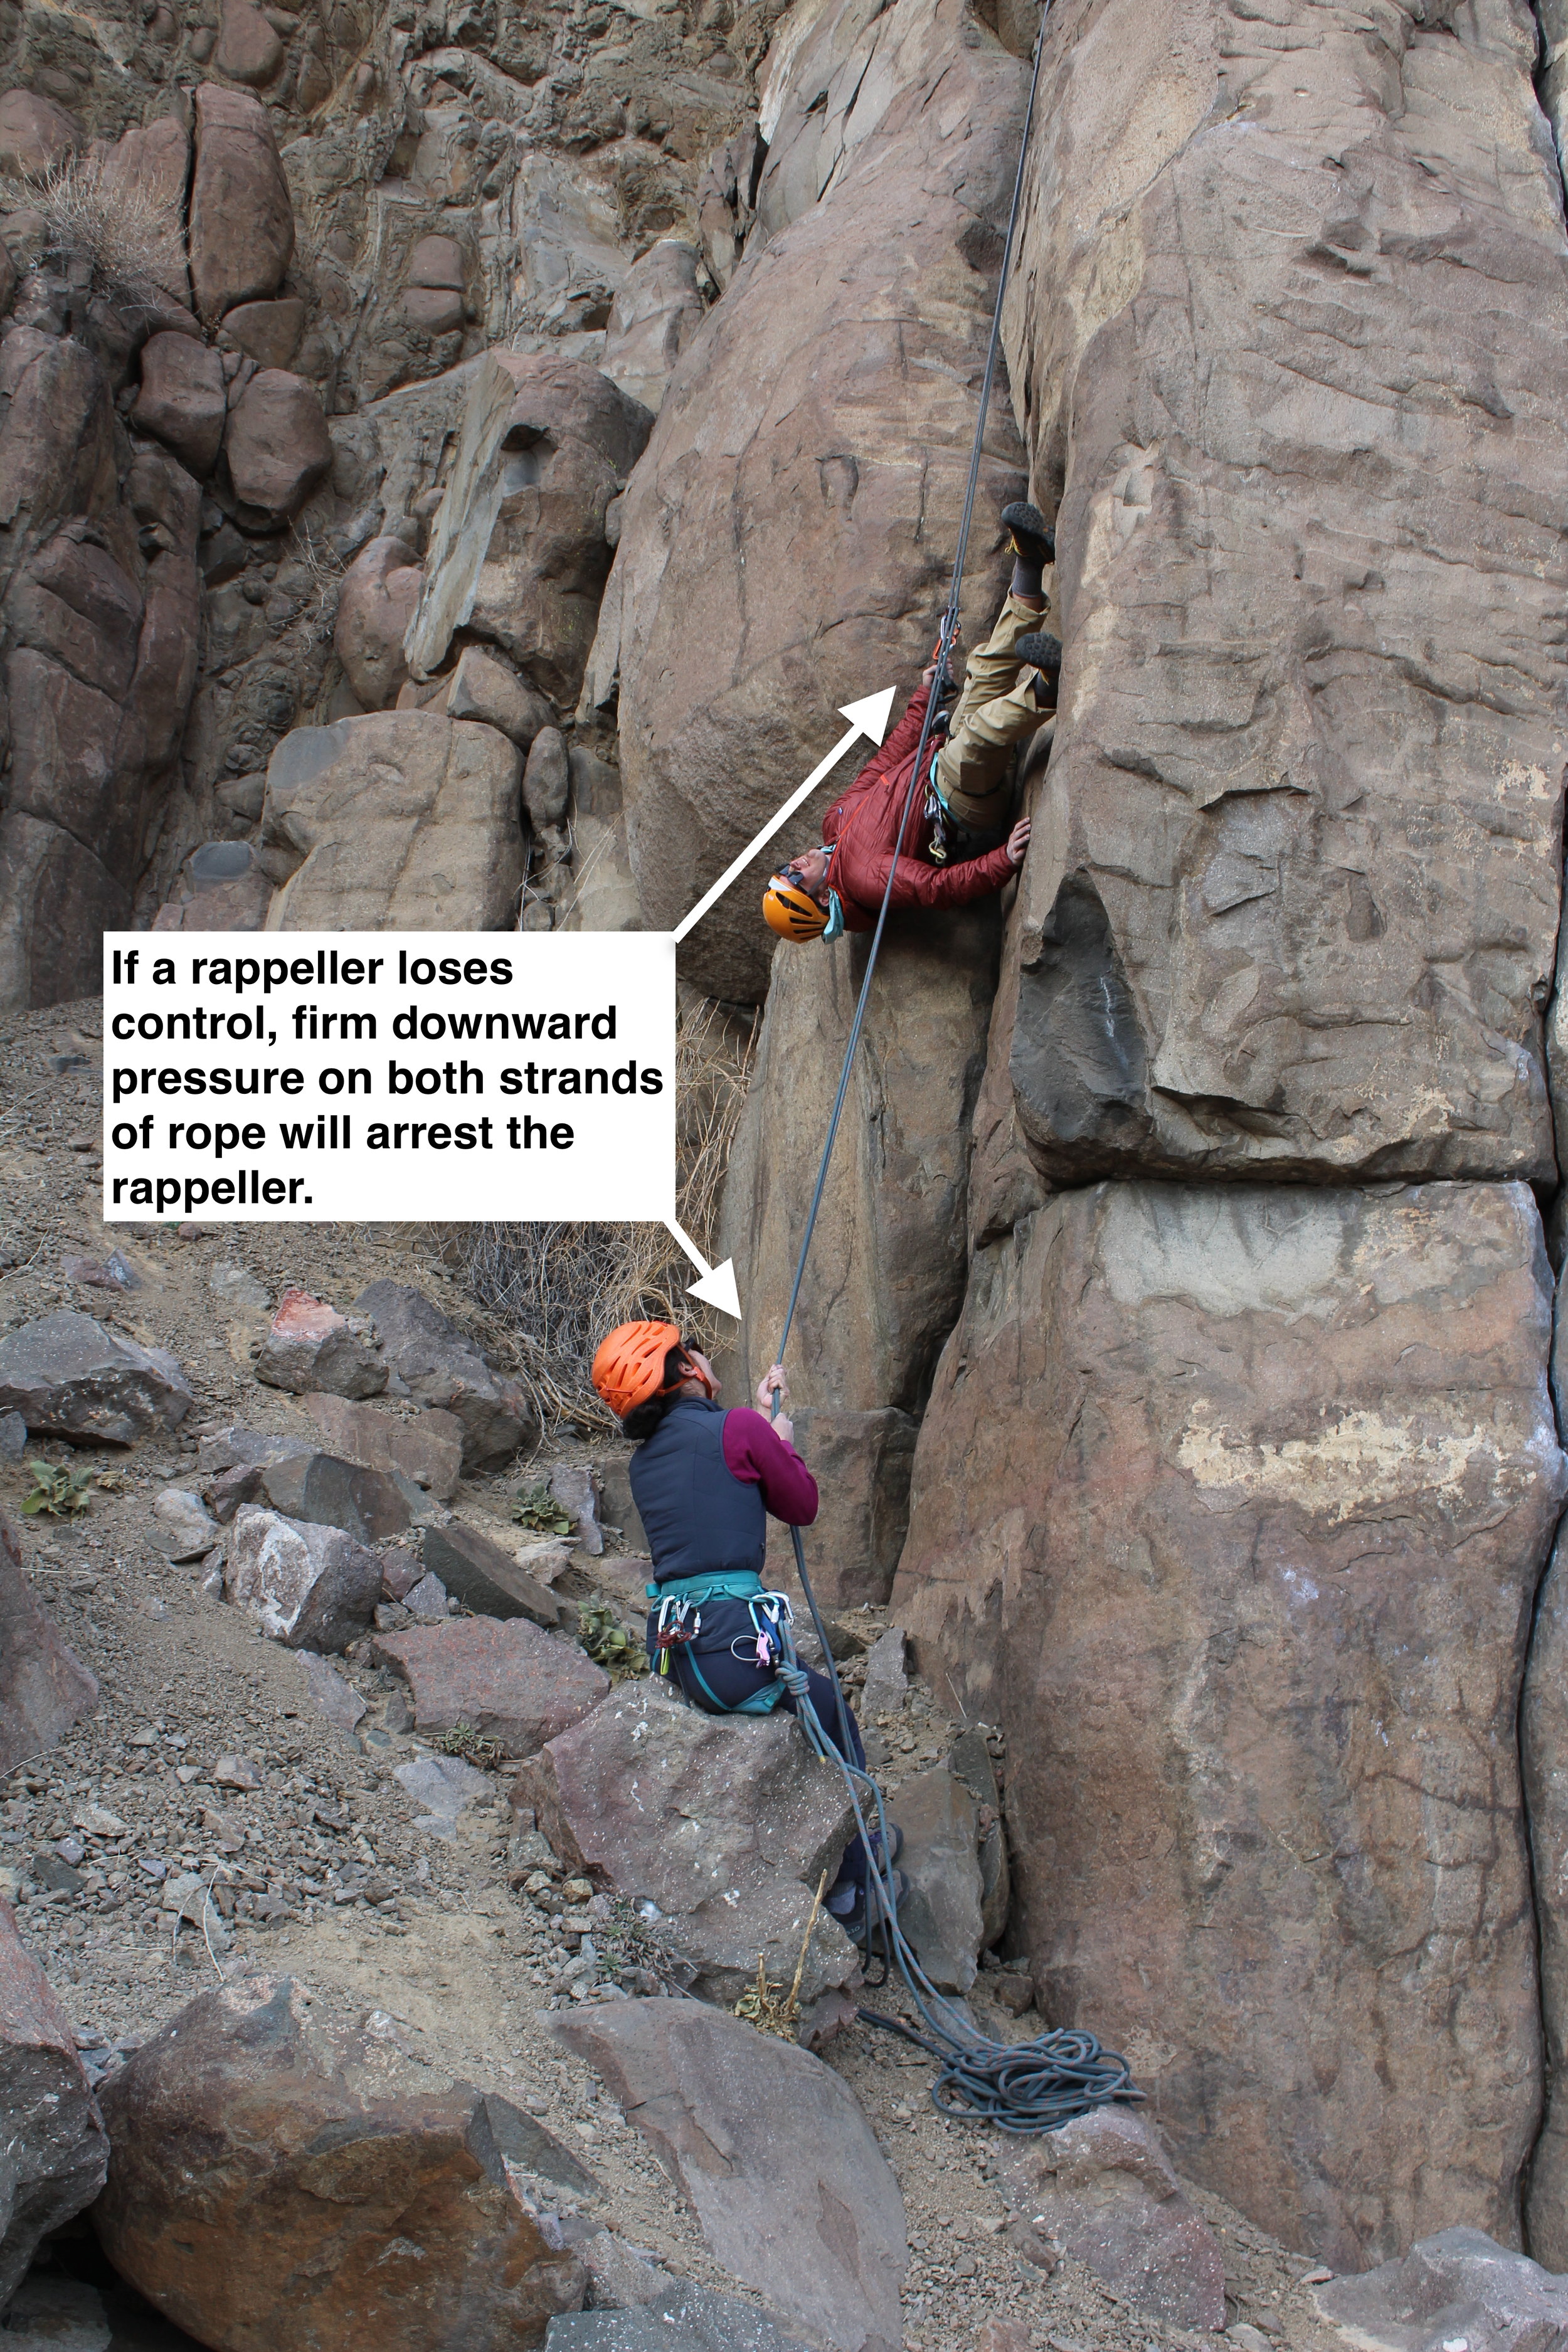 When rappellers lose control it happens quickly and unexpectedly, but a quick and firm tug on the brake strands will bring the rappeller to a halt.